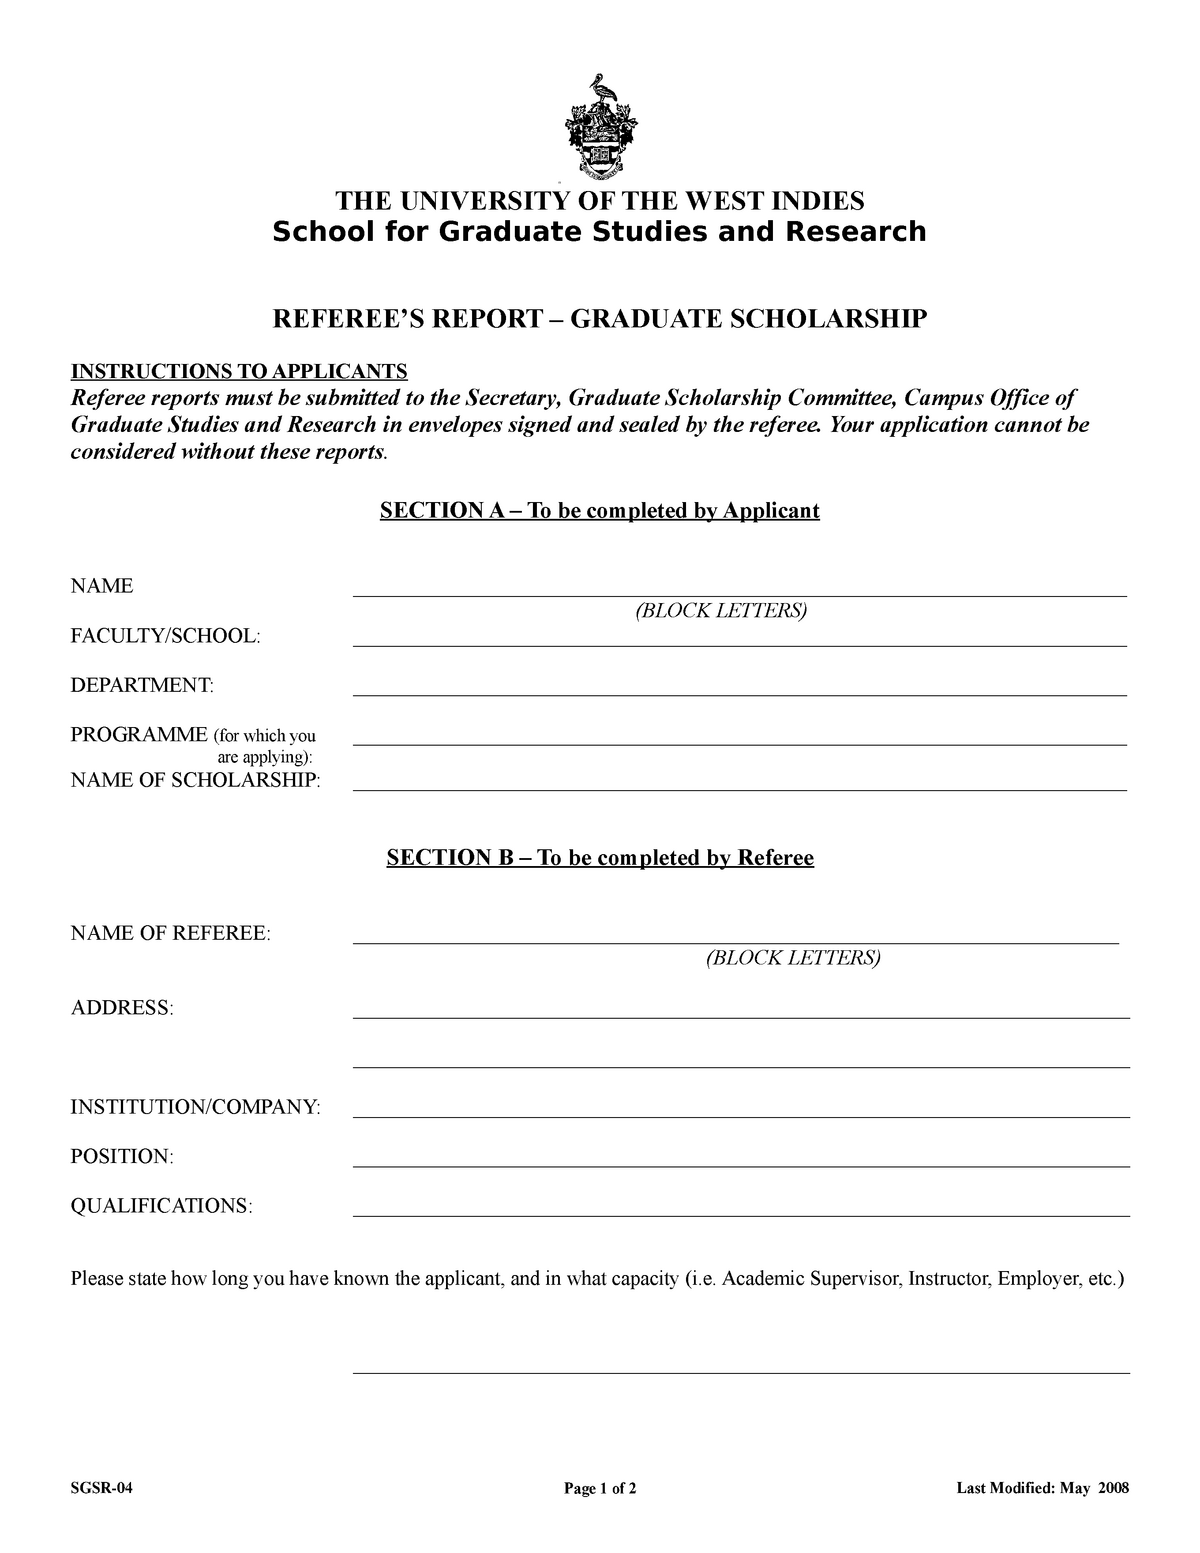 Referee Report Graduate Scholarship - THE UNIVERSITY OF THE WEST